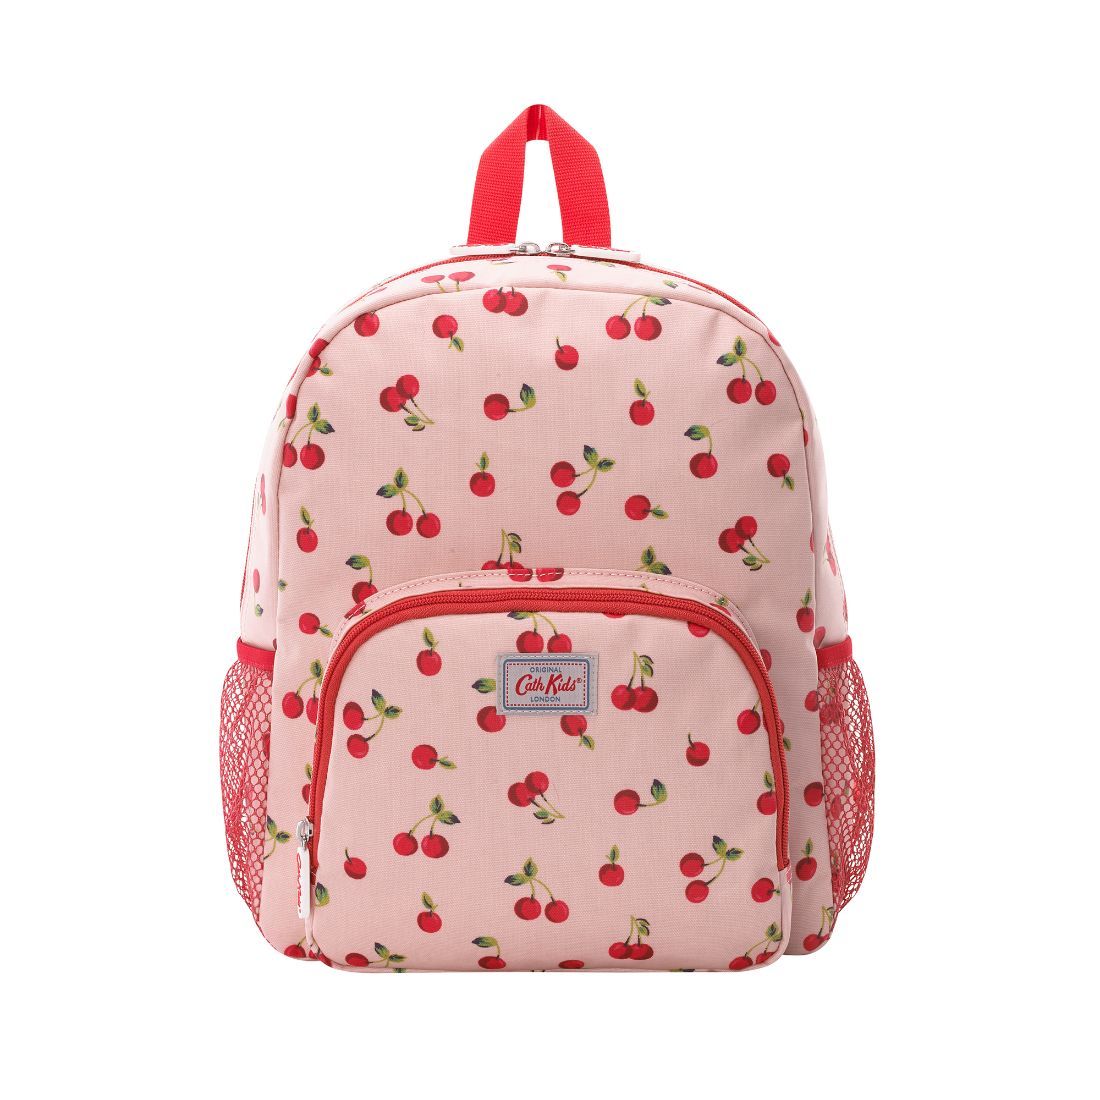 Cherries Kids Large Backpack with Mesh Pocket